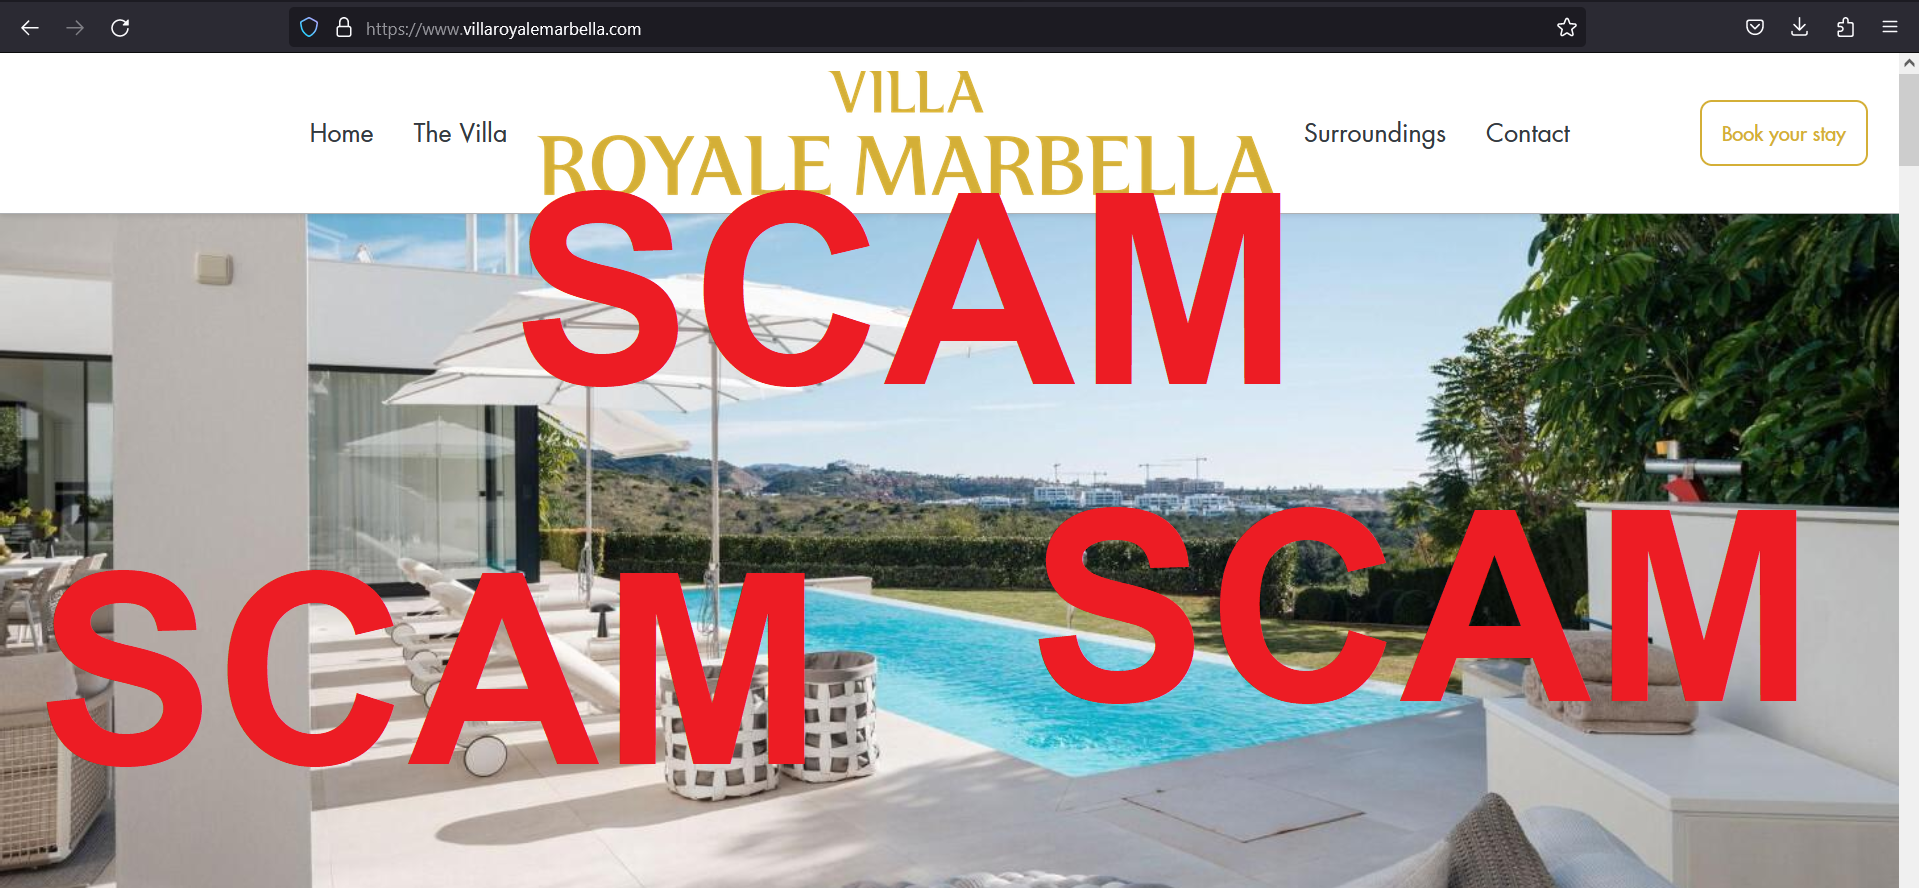 You are currently viewing Fraudulent website: villaroyalemarbella.com SCAM SCAM